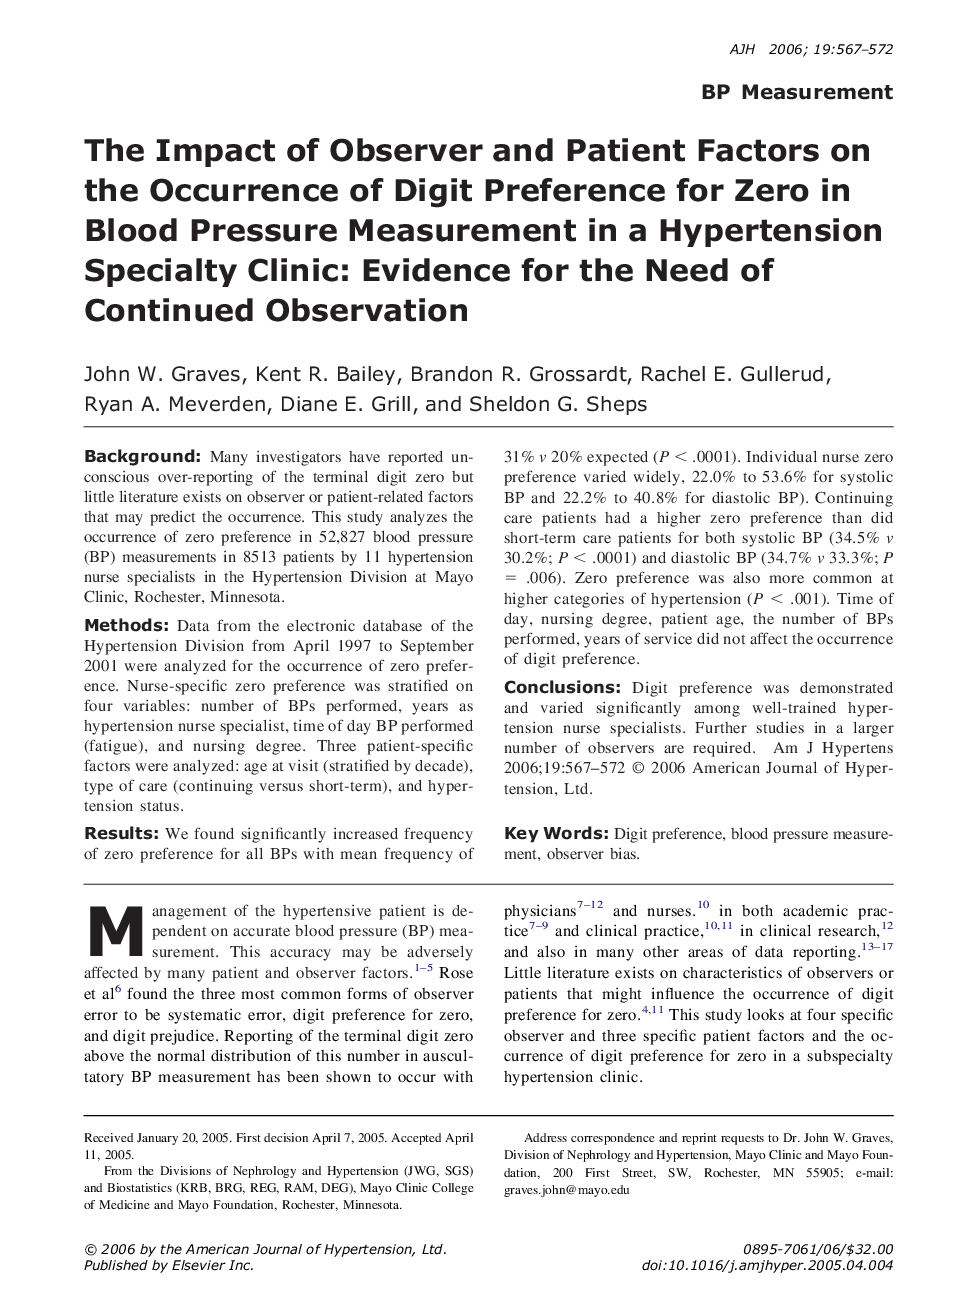 The Impact of Observer and Patient Factors on the Occurrence of Digit Preference for Zero in Blood Pressure Measurement in a Hypertension Specialty Clinic: Evidence for the Need of Continued Observation